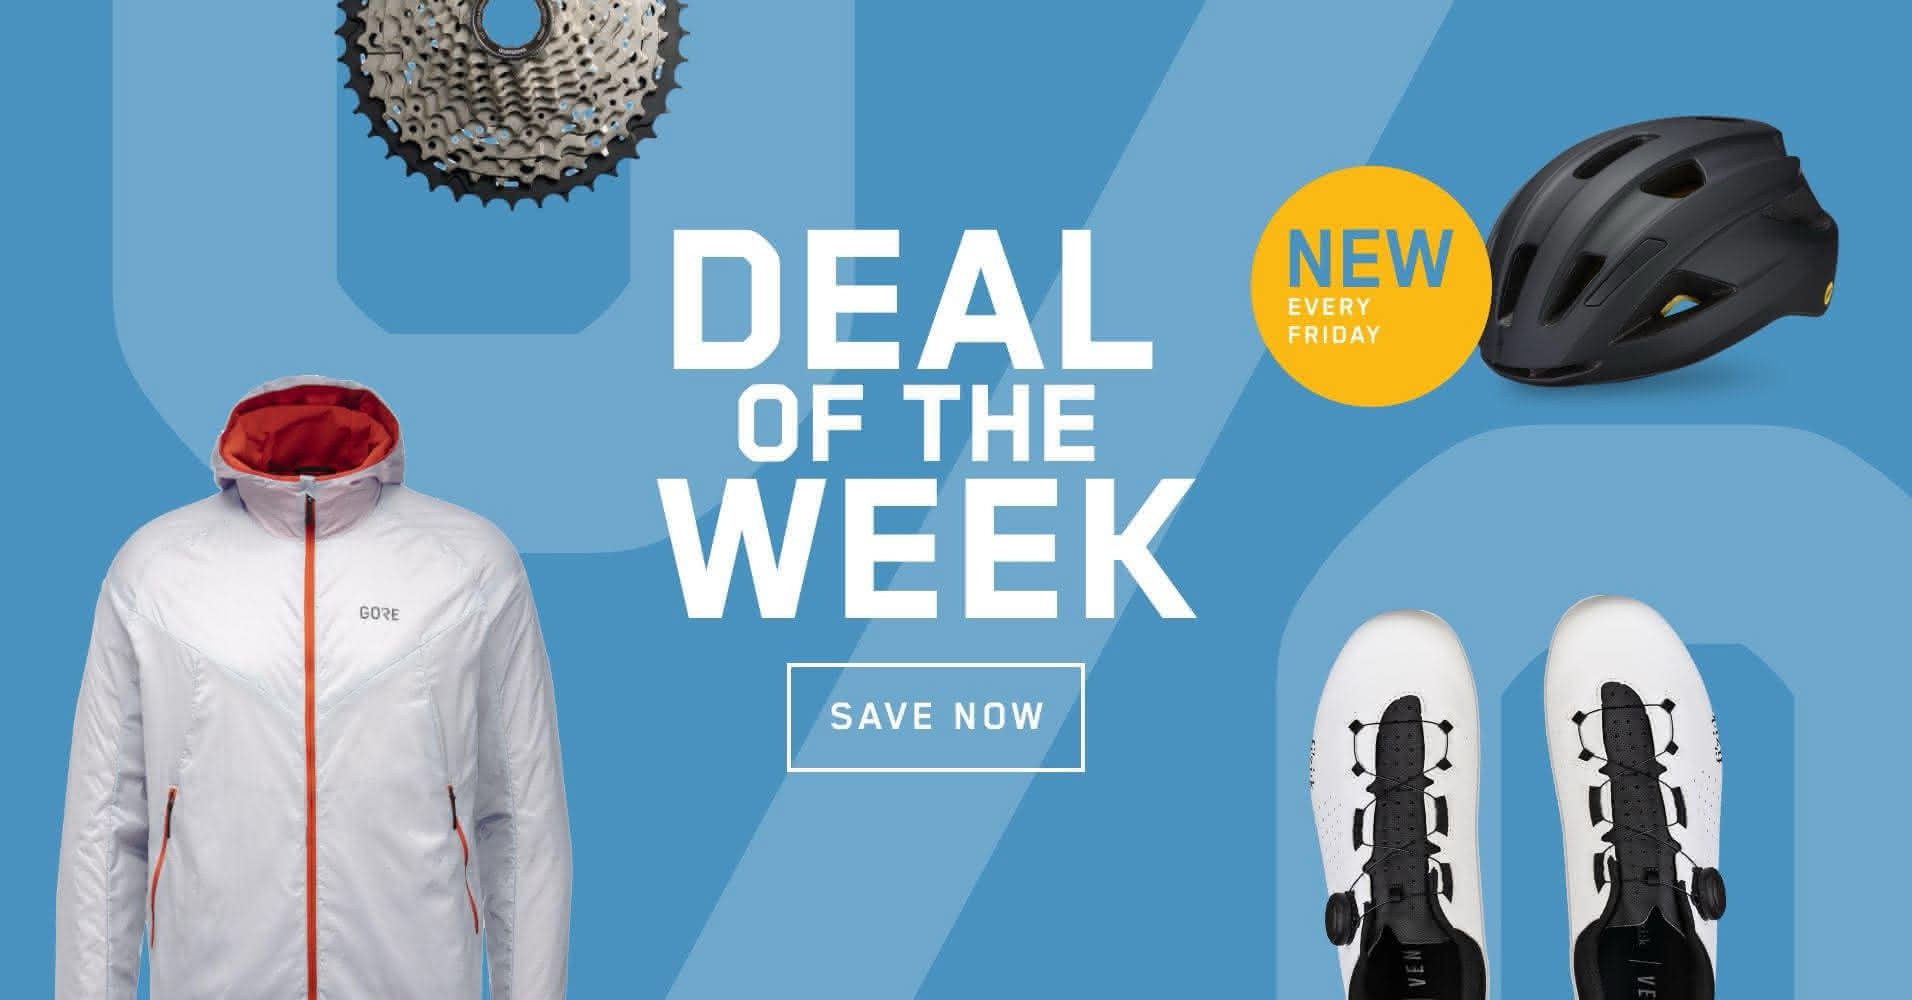 Deal of the Week - New every friday - Only while stocks last - deal-of-the-week